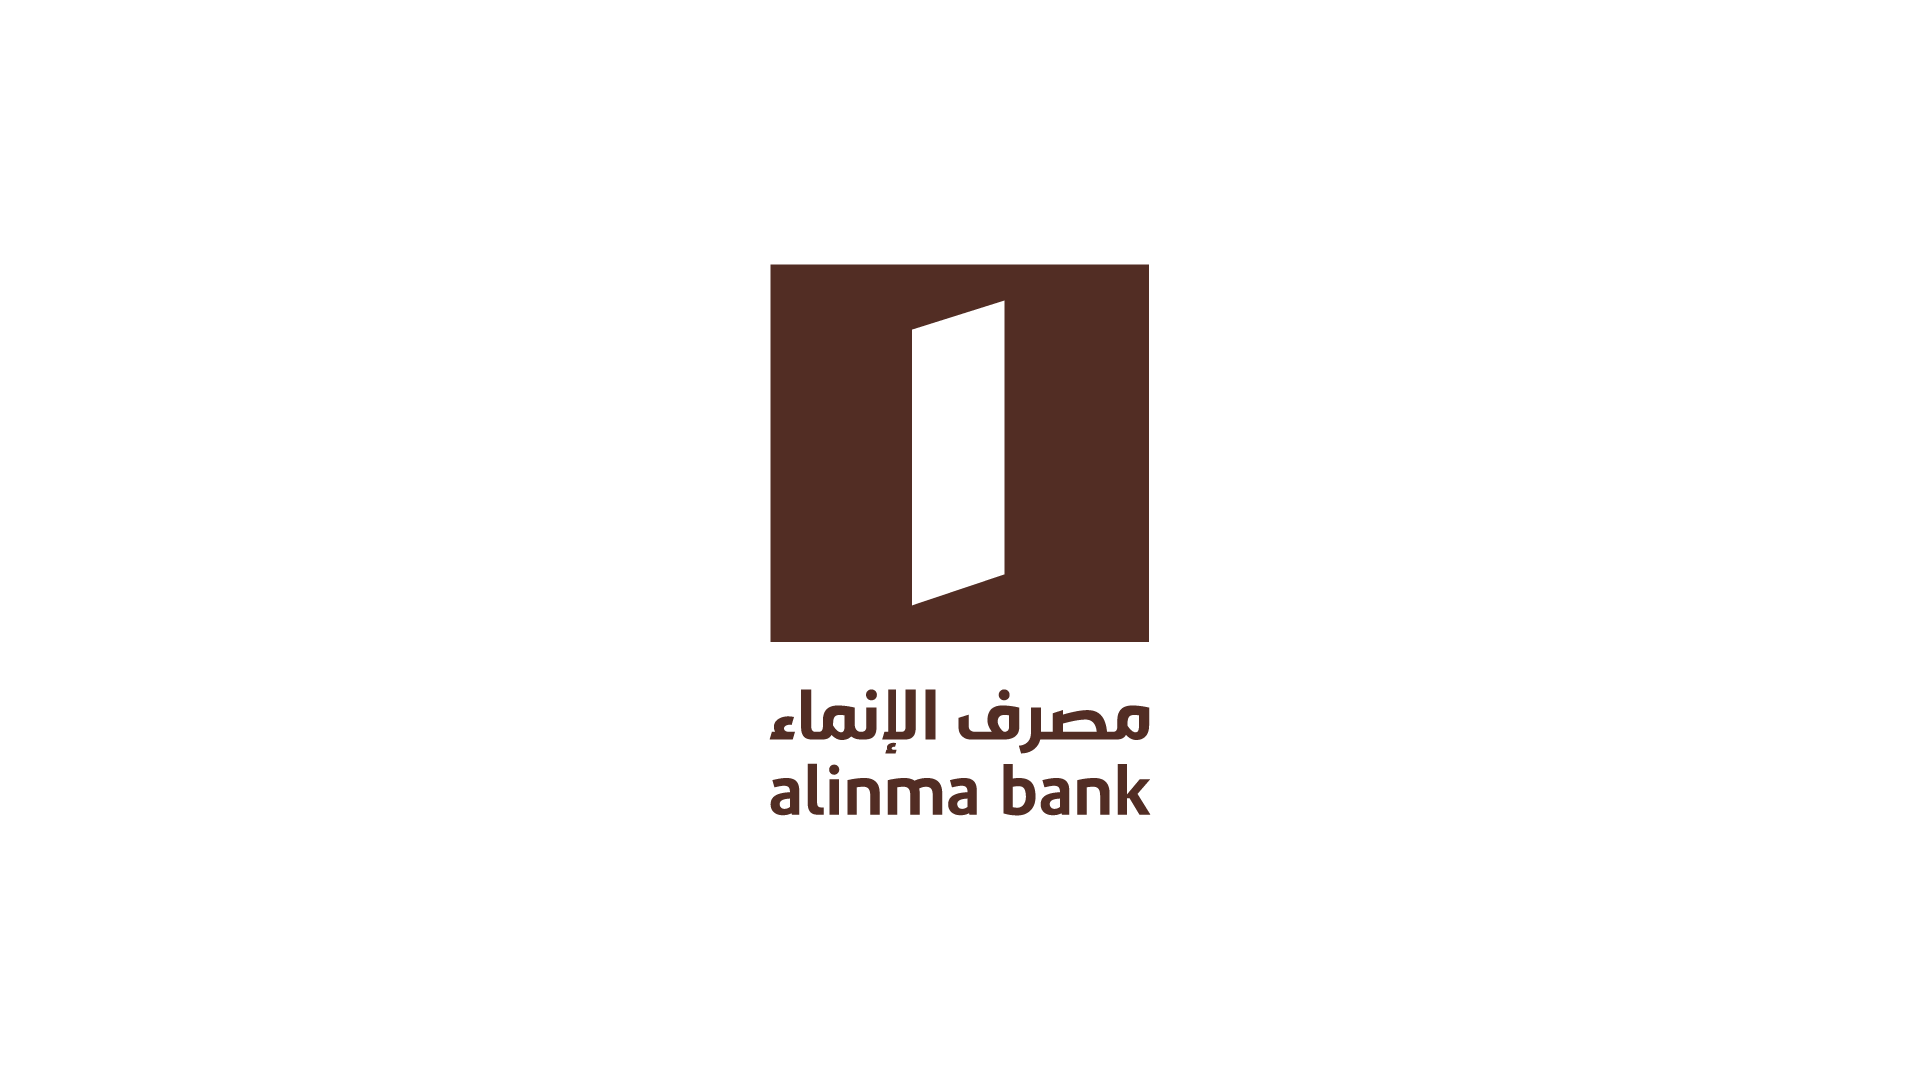 Alinma Bank launches "iz", the first comprehensive Digital Banking experience for youth